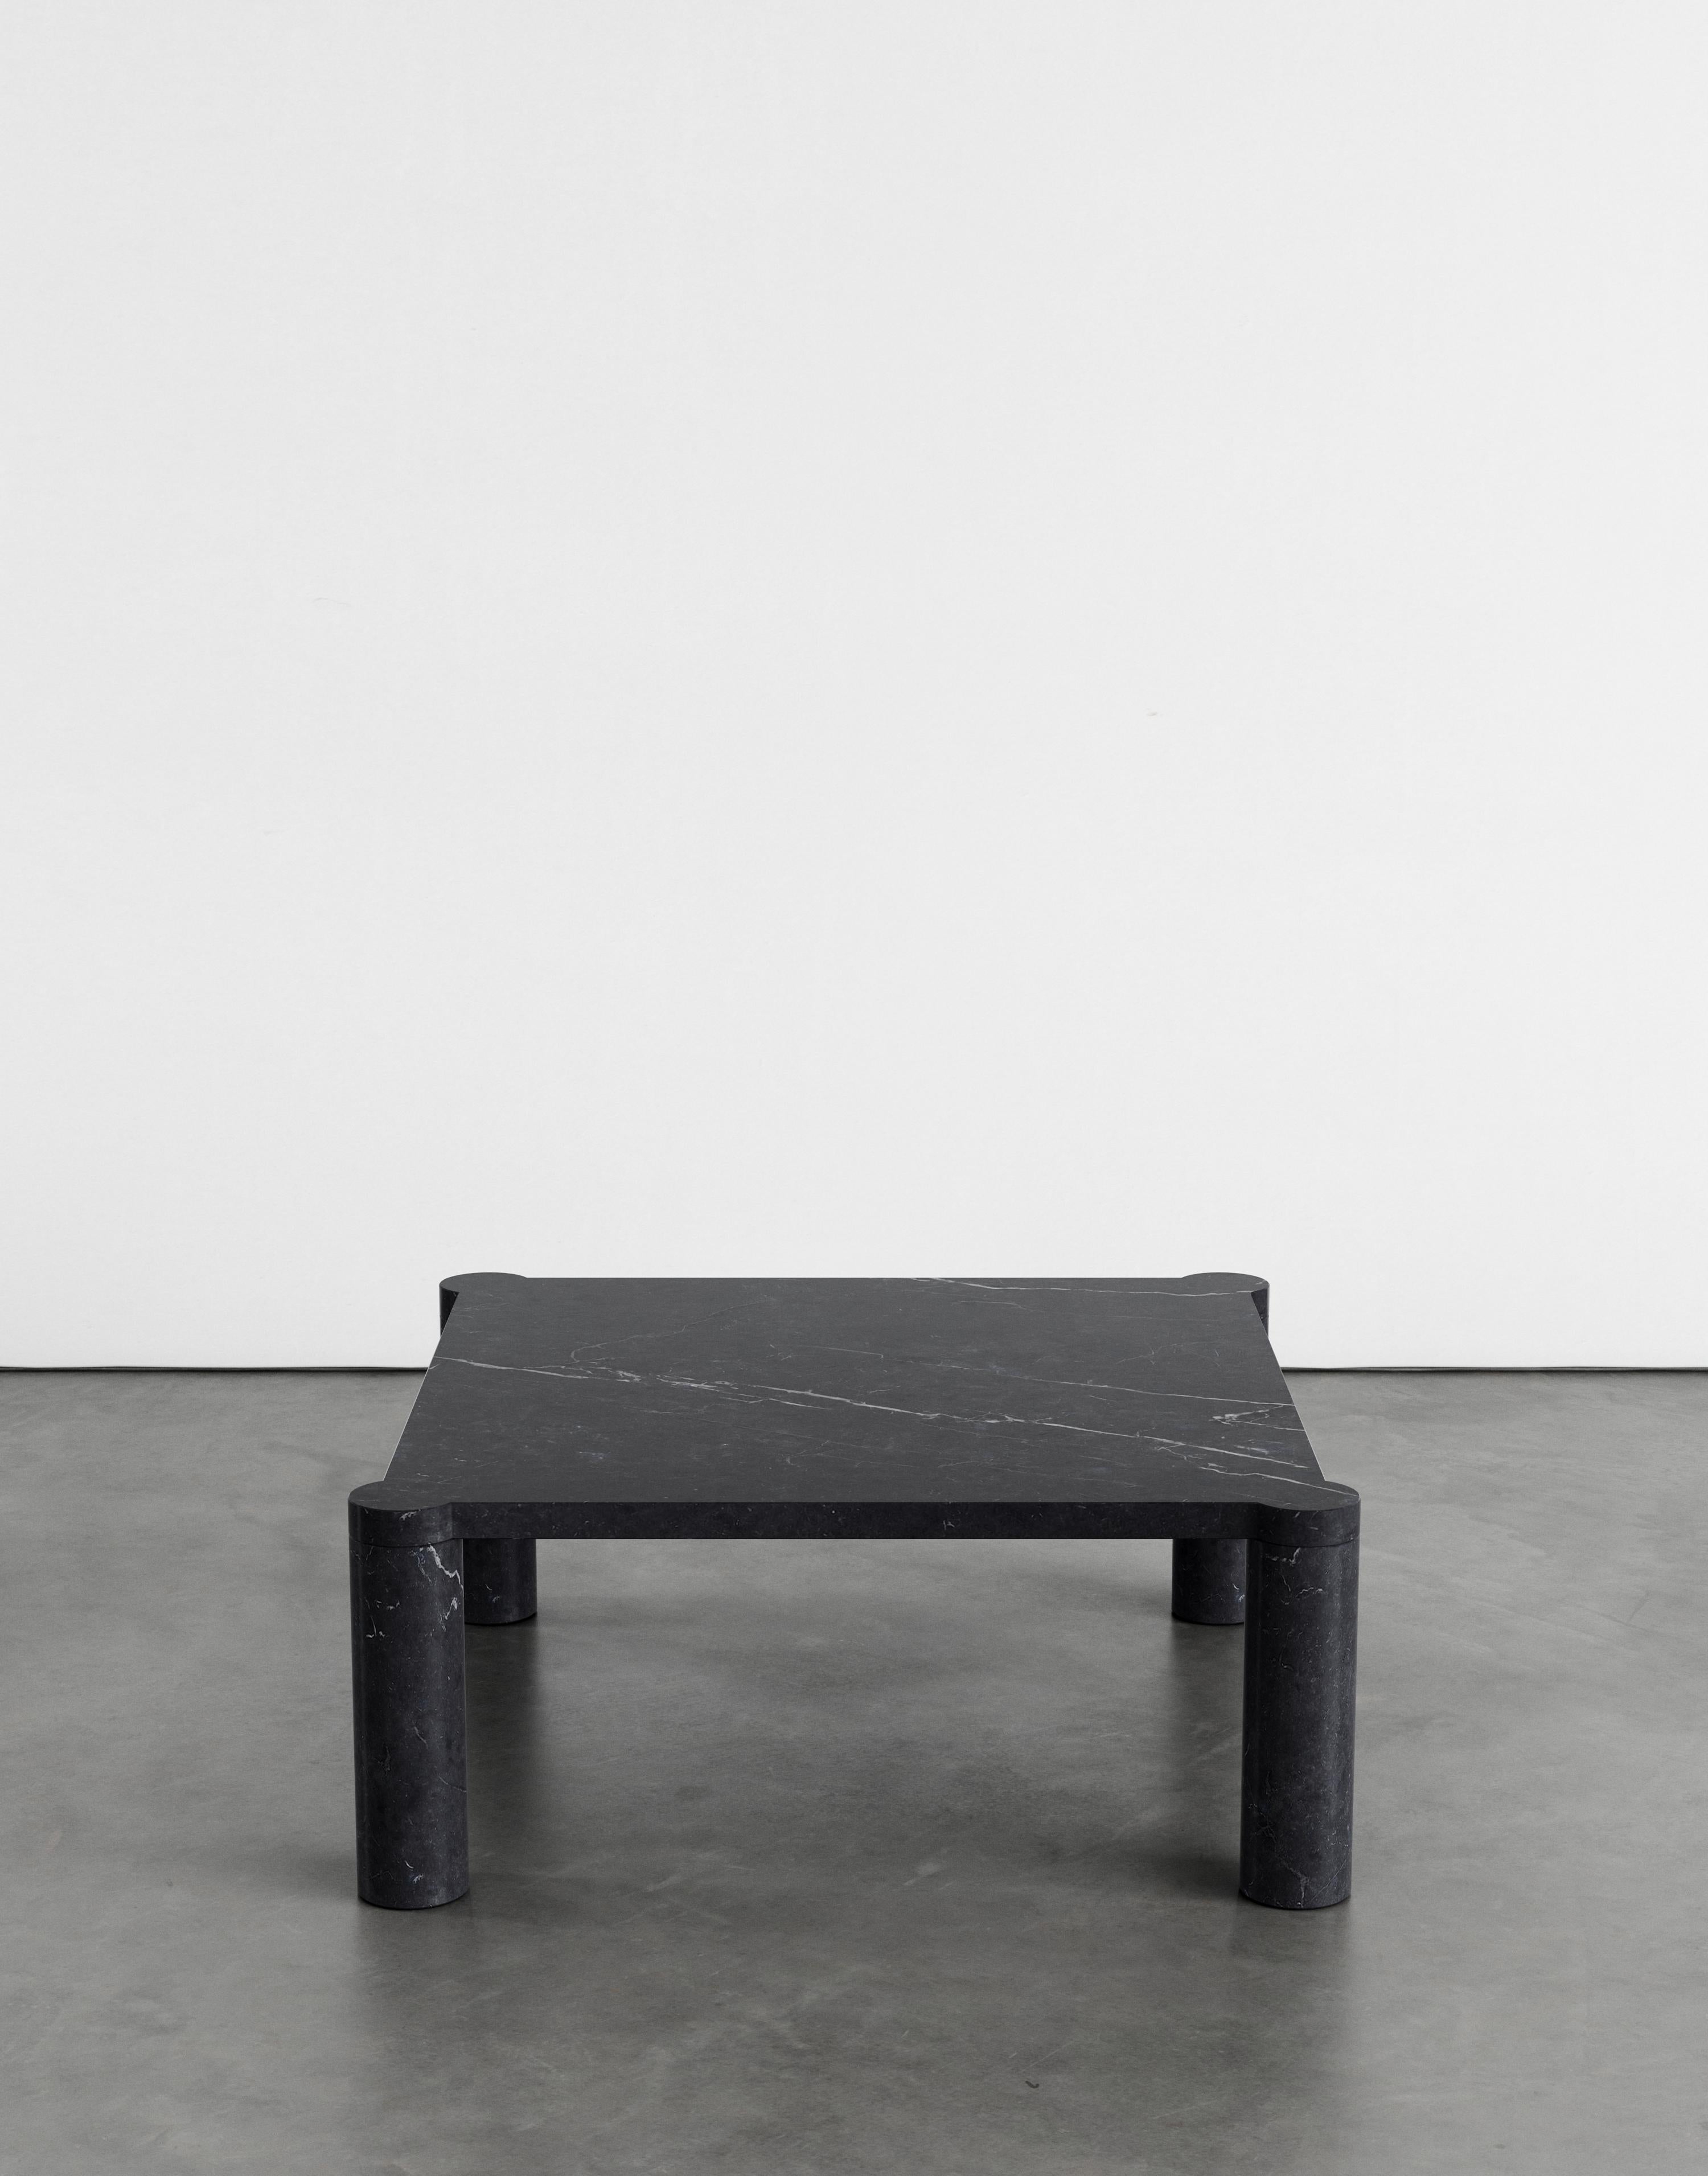 Alessio 80 coffee table by Agglomerati
Dimensions: D 80 x W 80 x H 33 cm.
Materials: Nero Marquina marble.
Available in other stones. 

Alessio is a square coffee table enclosed by four cylindrical legs which sit seamlessly flush under the